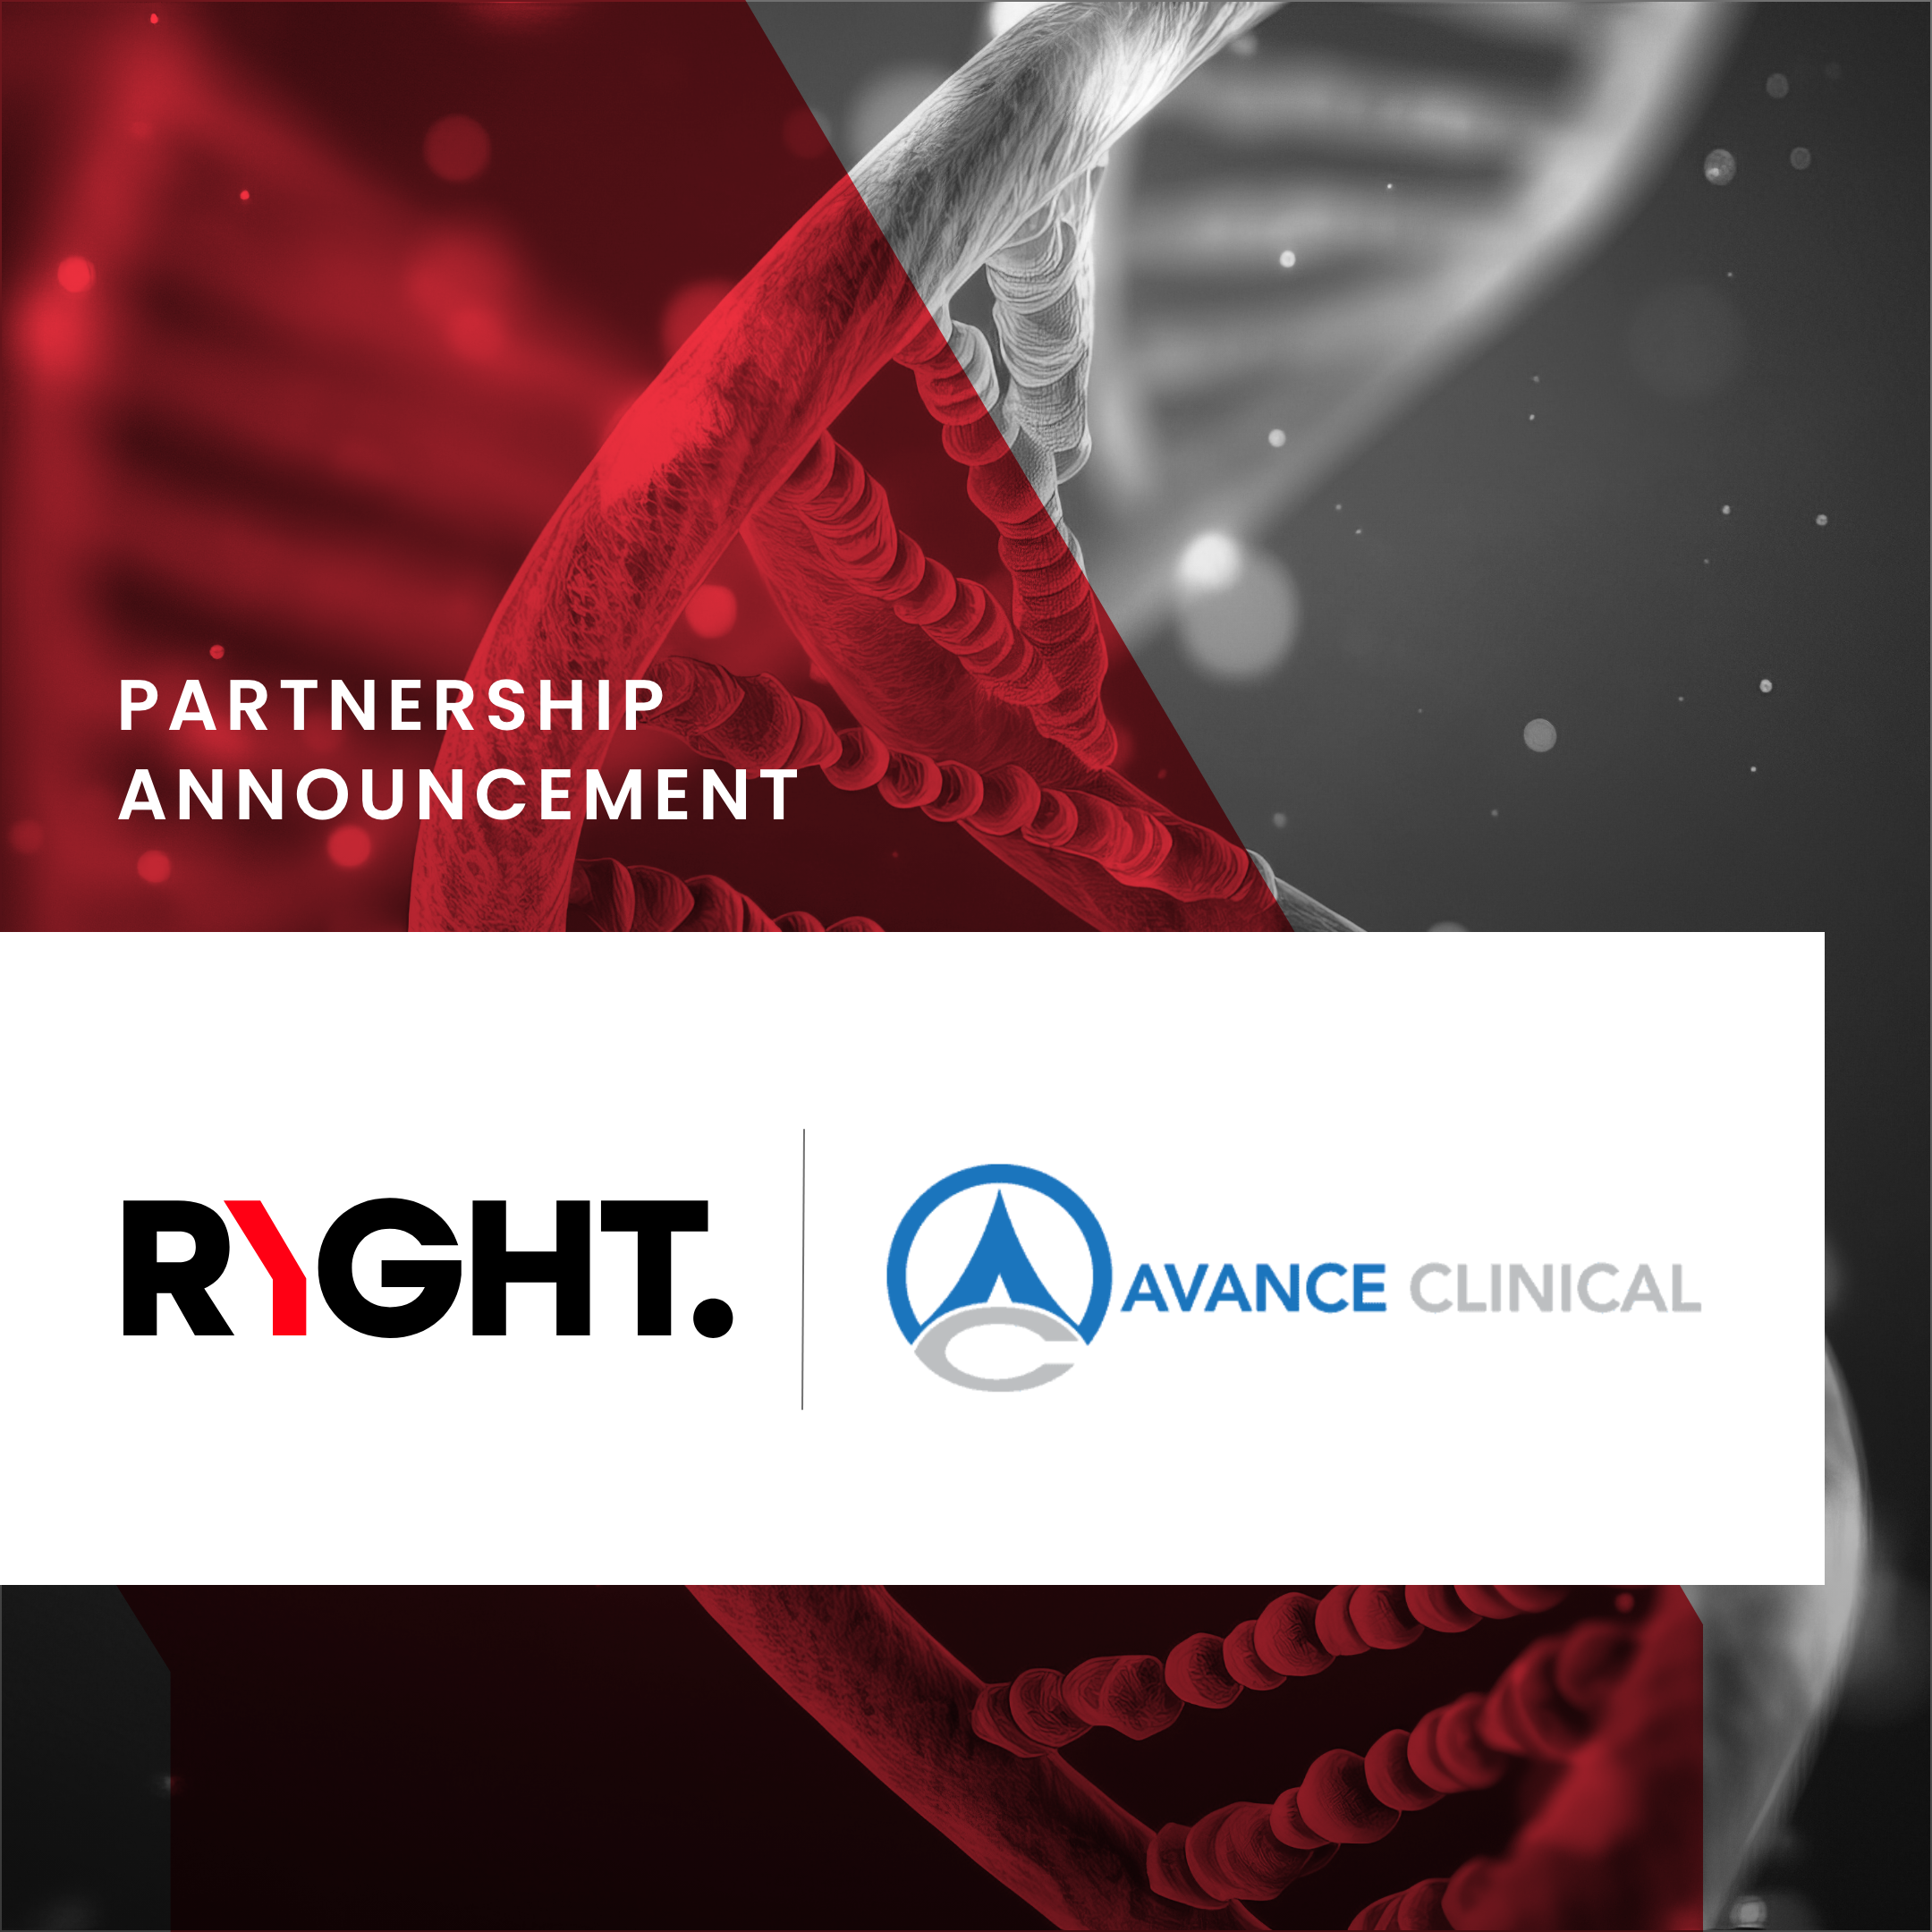 Avance Clinical and Ryght Partner to Bring Novel GenAI Technologies to Clinical Research Networks